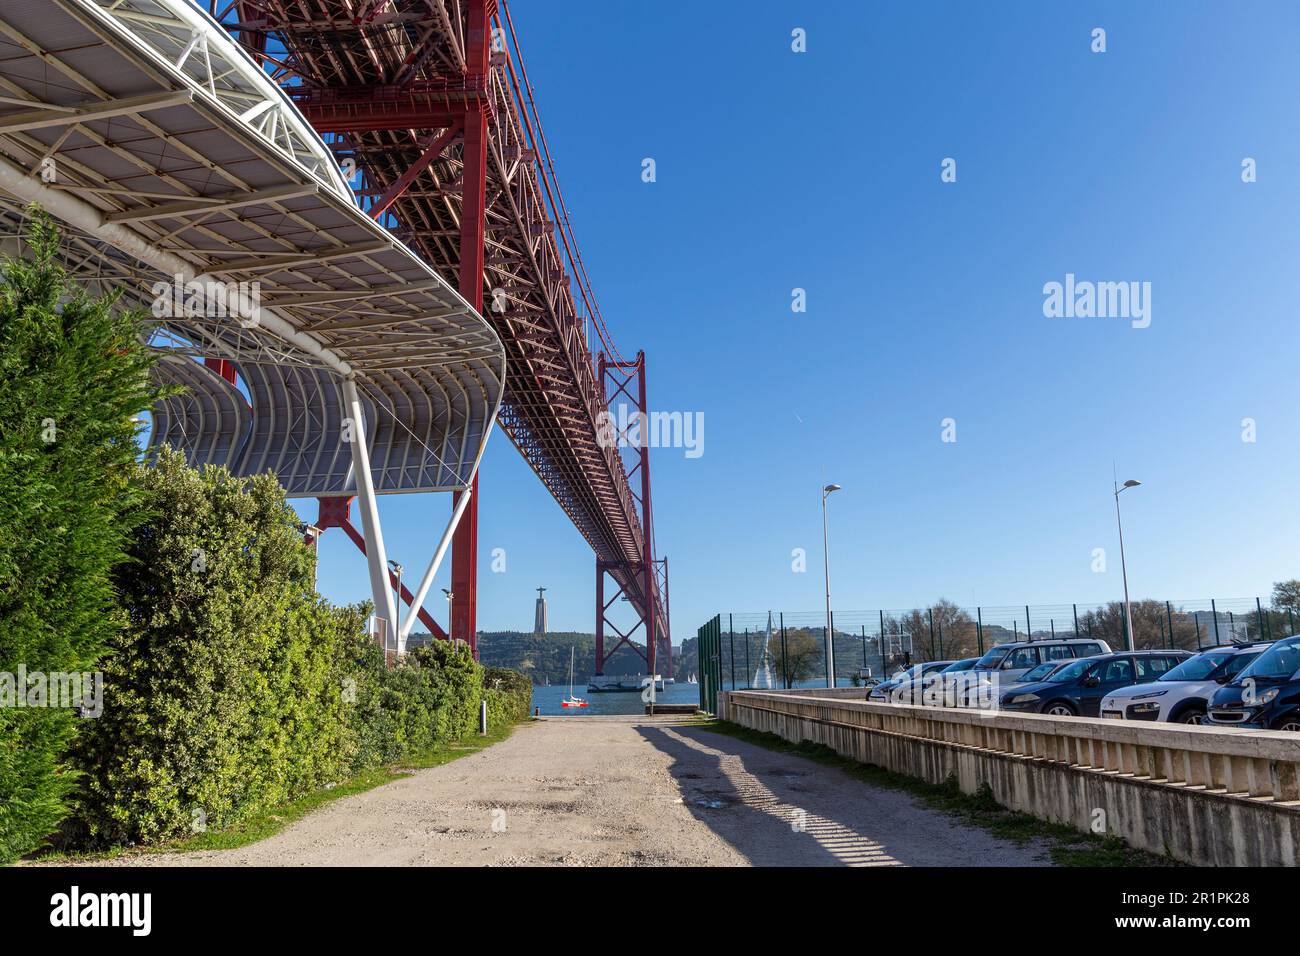 The 25 April bridge (Ponte 25 de Abril) is a steel suspension bridge located in Lisbon, Portugal, crossing the Targus river. It is one of the most famous landmarks of the region. Stock Photo